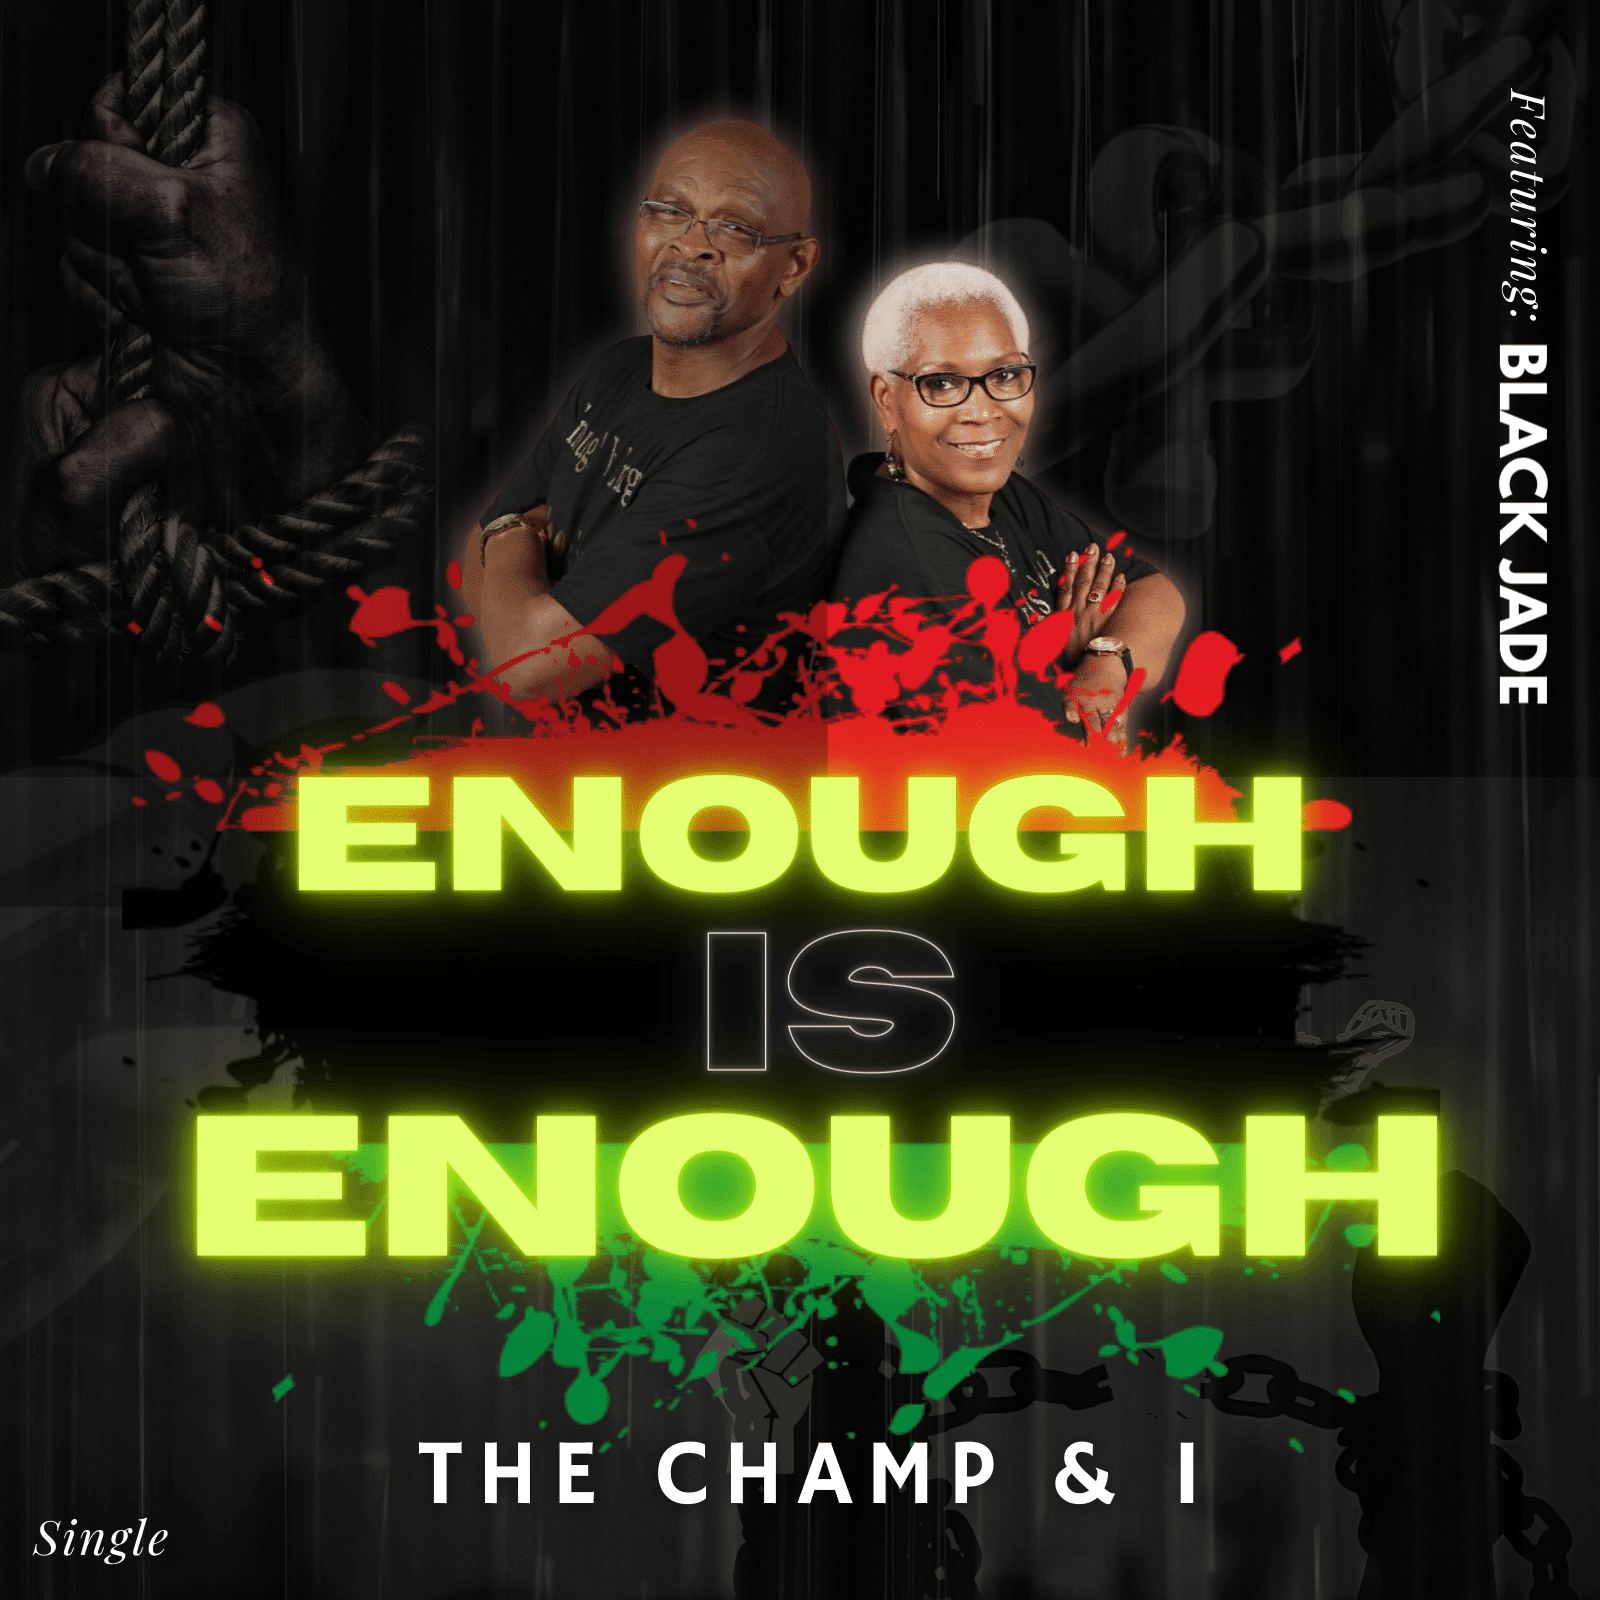 Art for Enough Is Enough by Champ & I featuring Black Jade